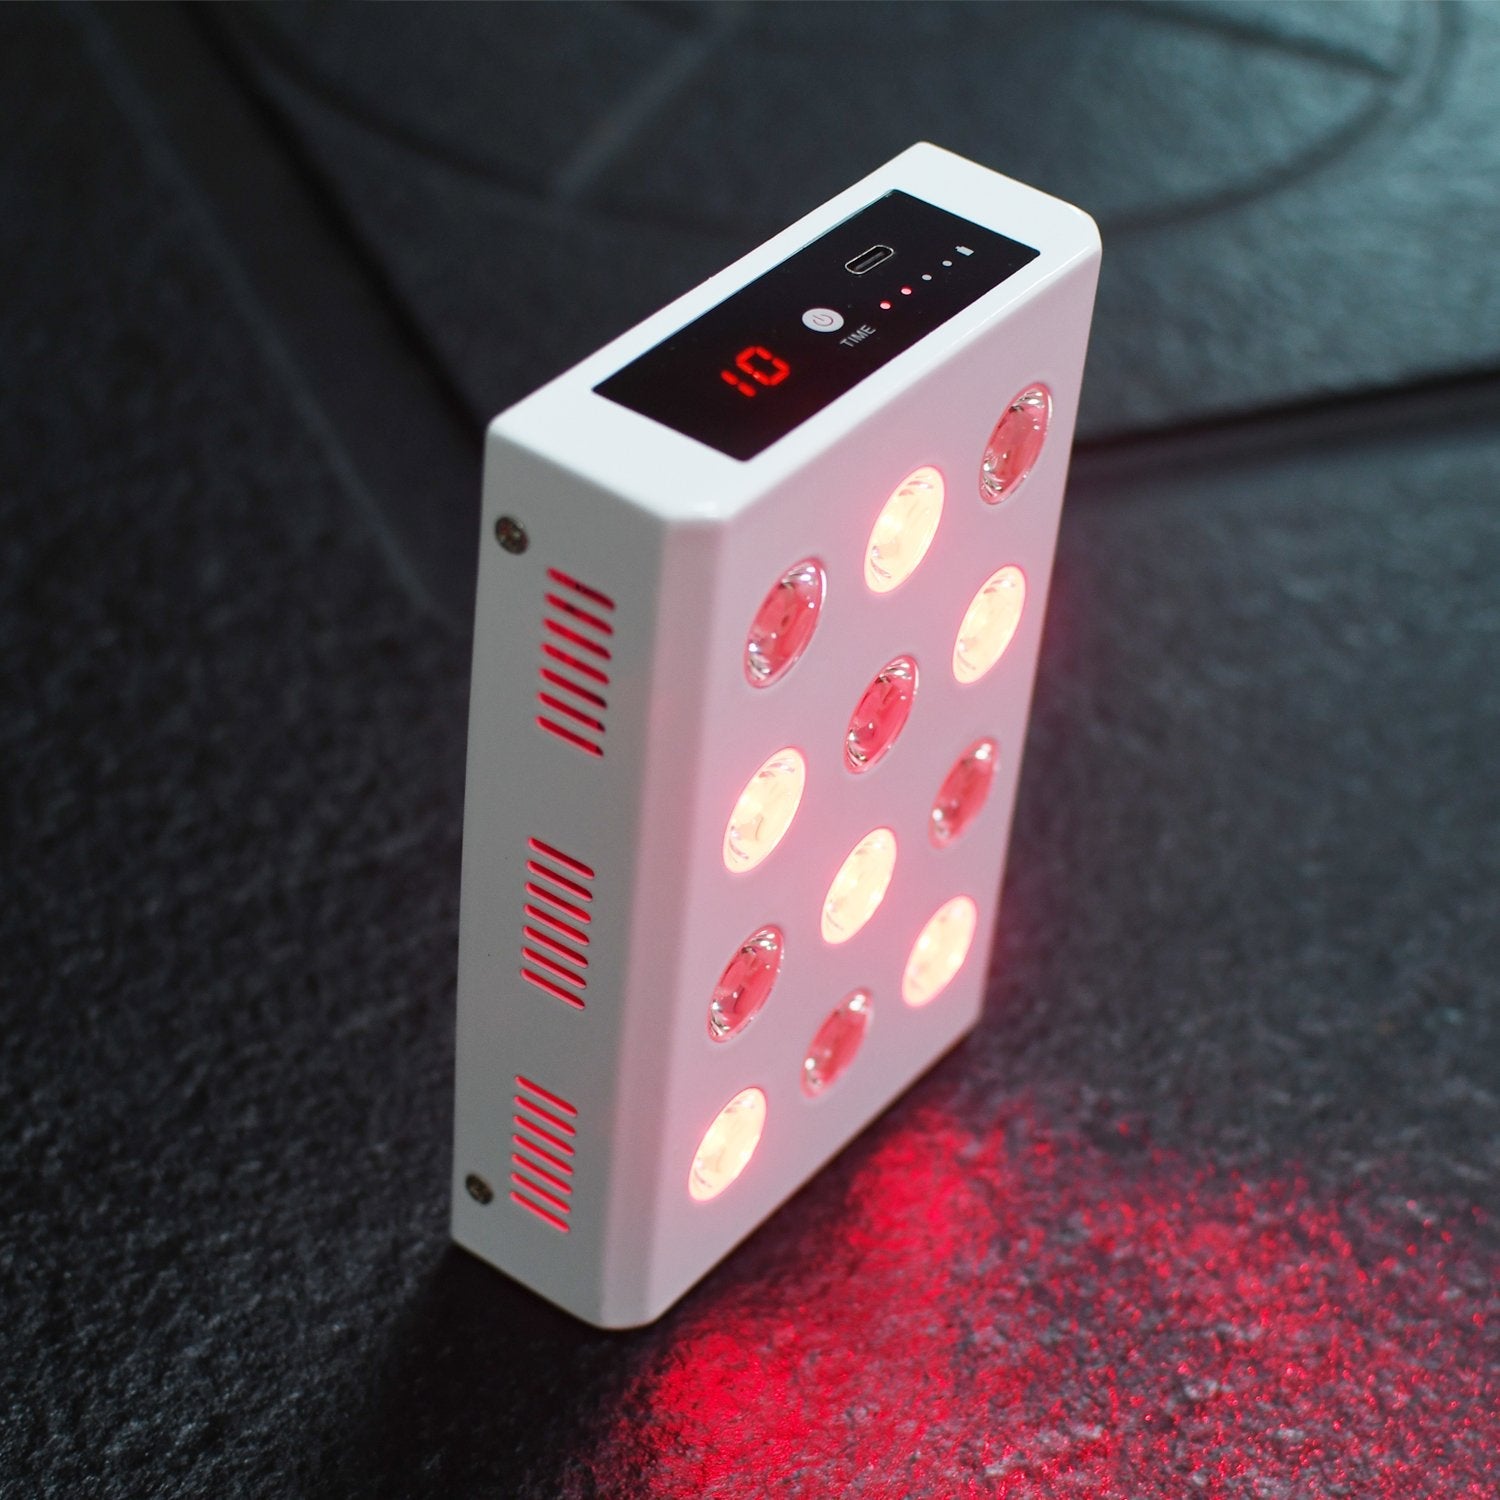 Red Light Therapy PowerPanel Portable Red Light Therapy Panels BlockBlueLight 